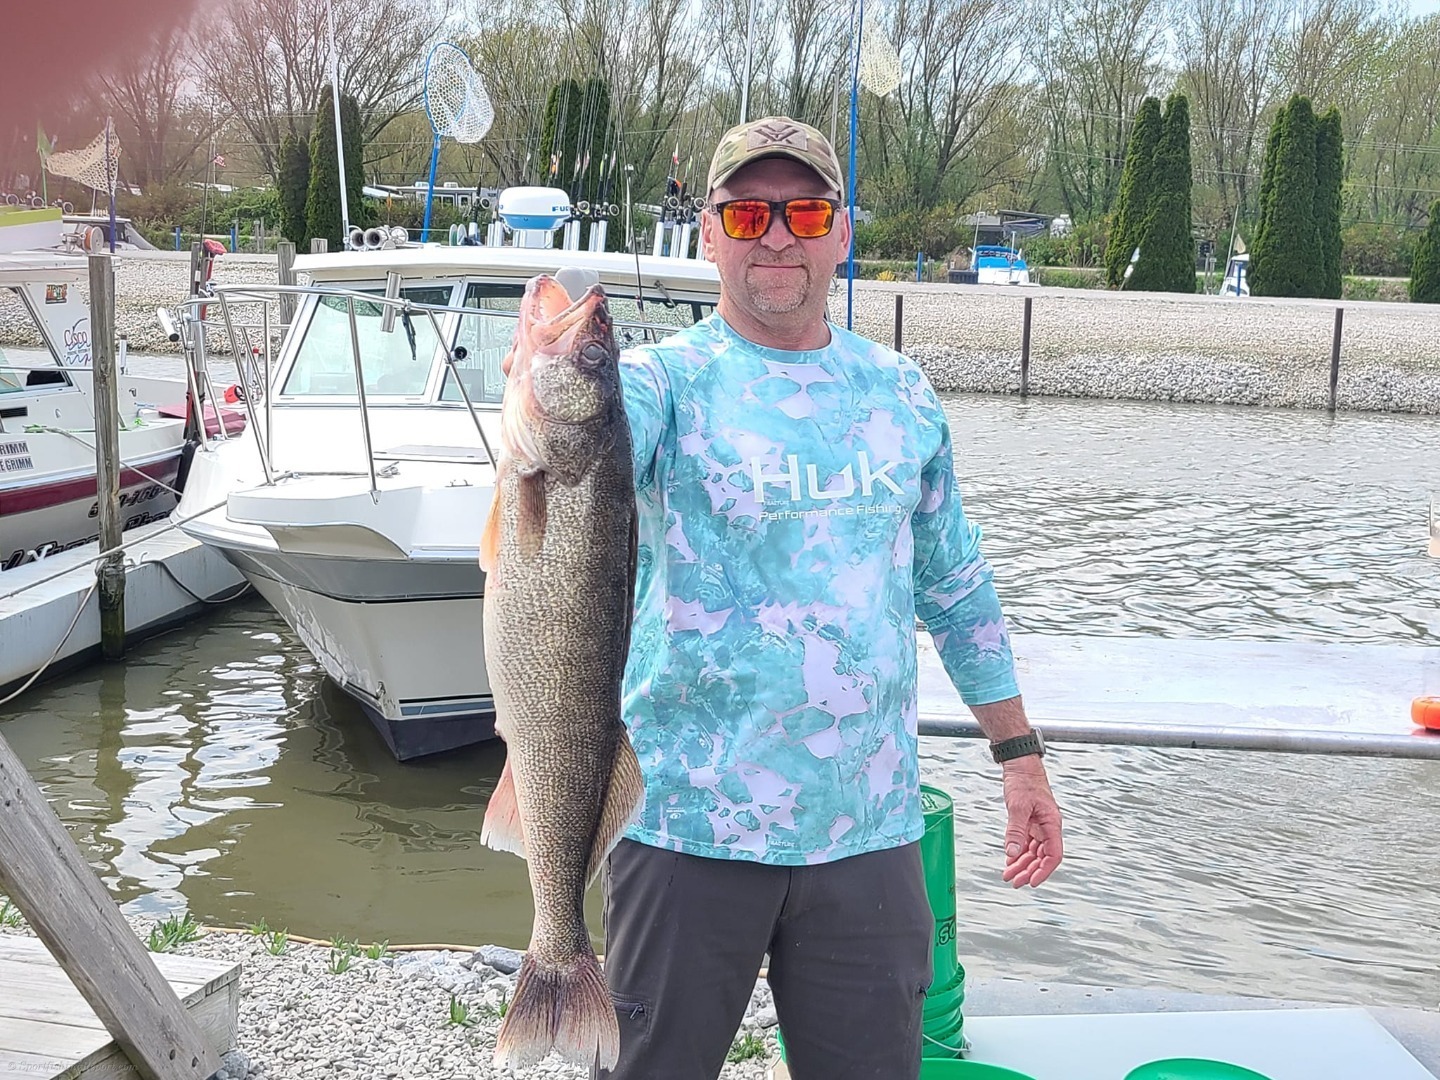 The Jig Bite On Lake Erie With Special Eyes Charters and Capt. Bob is Heating Up 